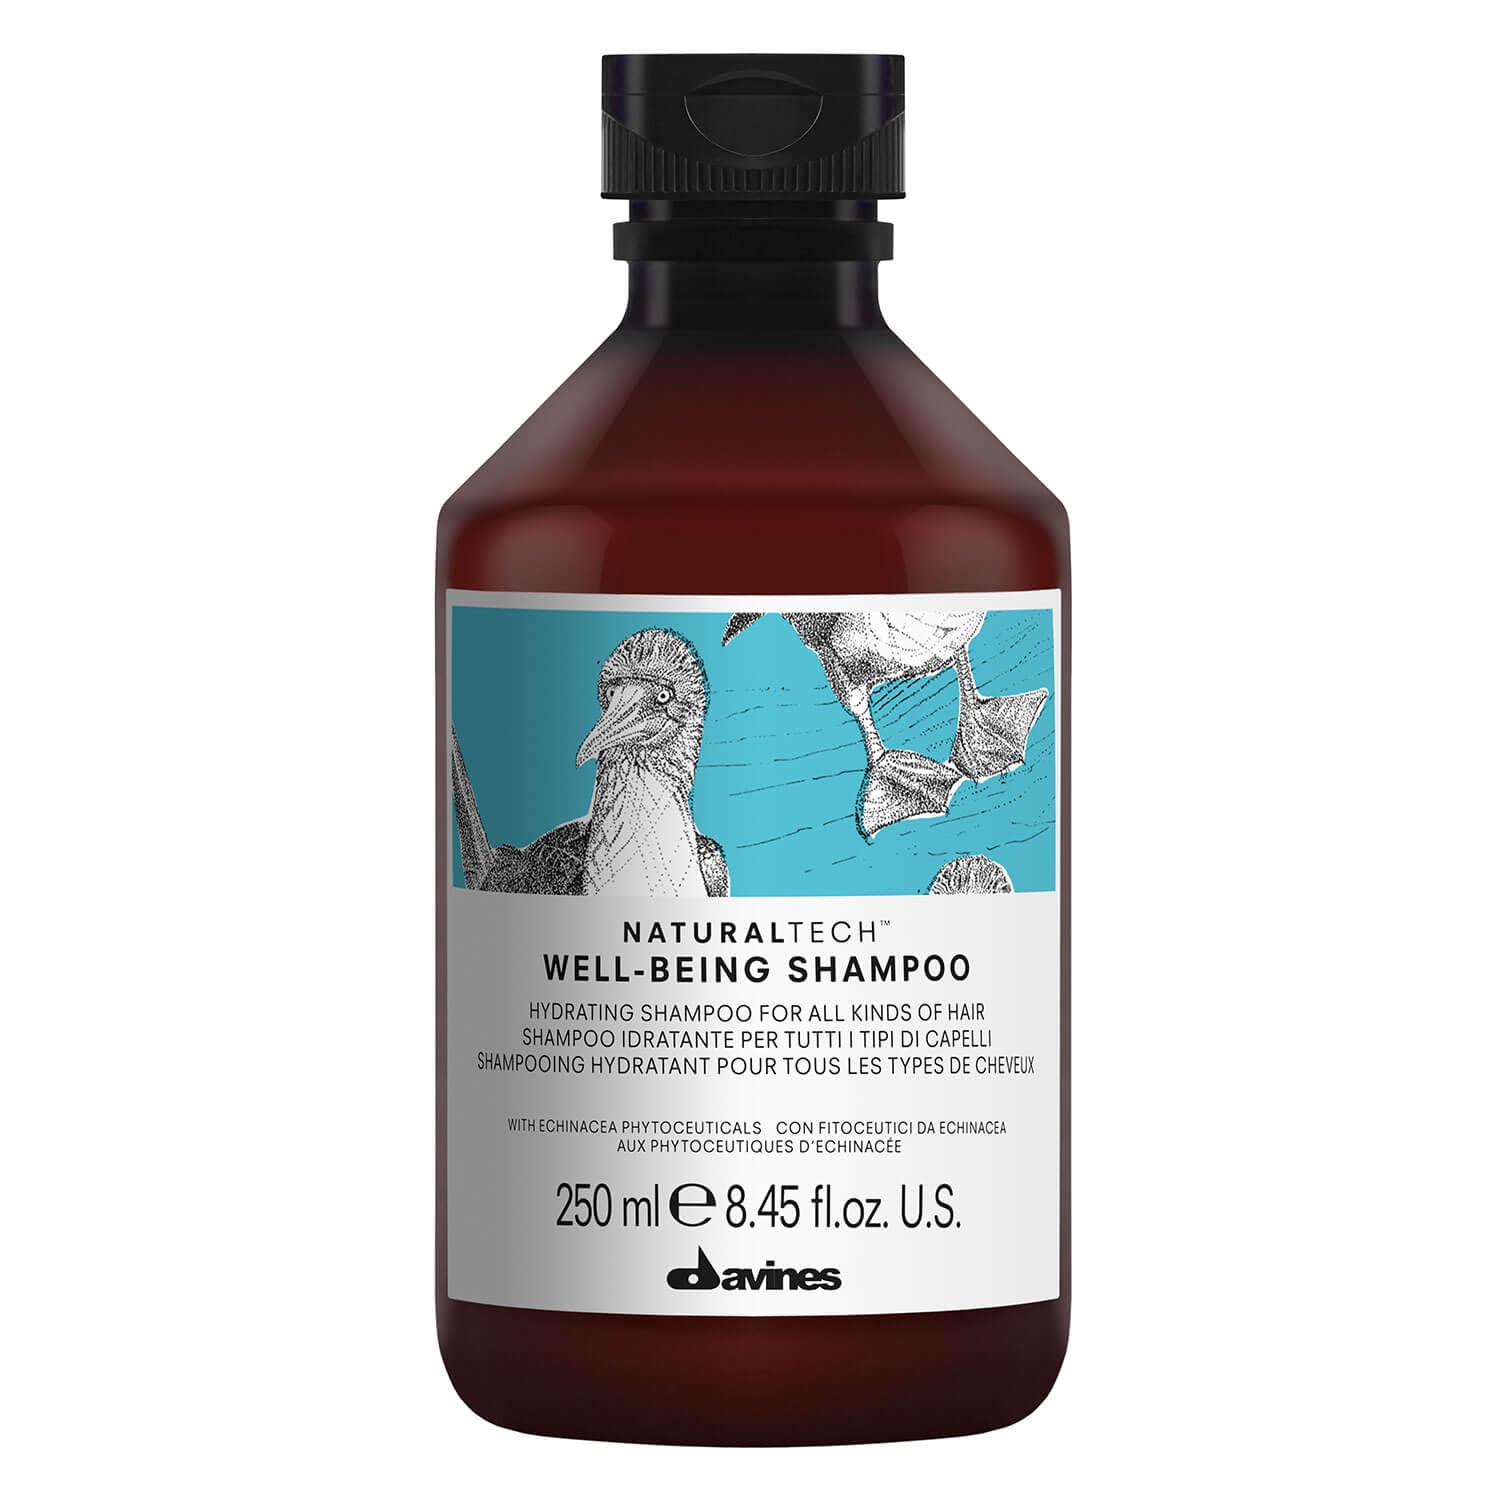 Product image from Naturaltech - Well Being Shampoo